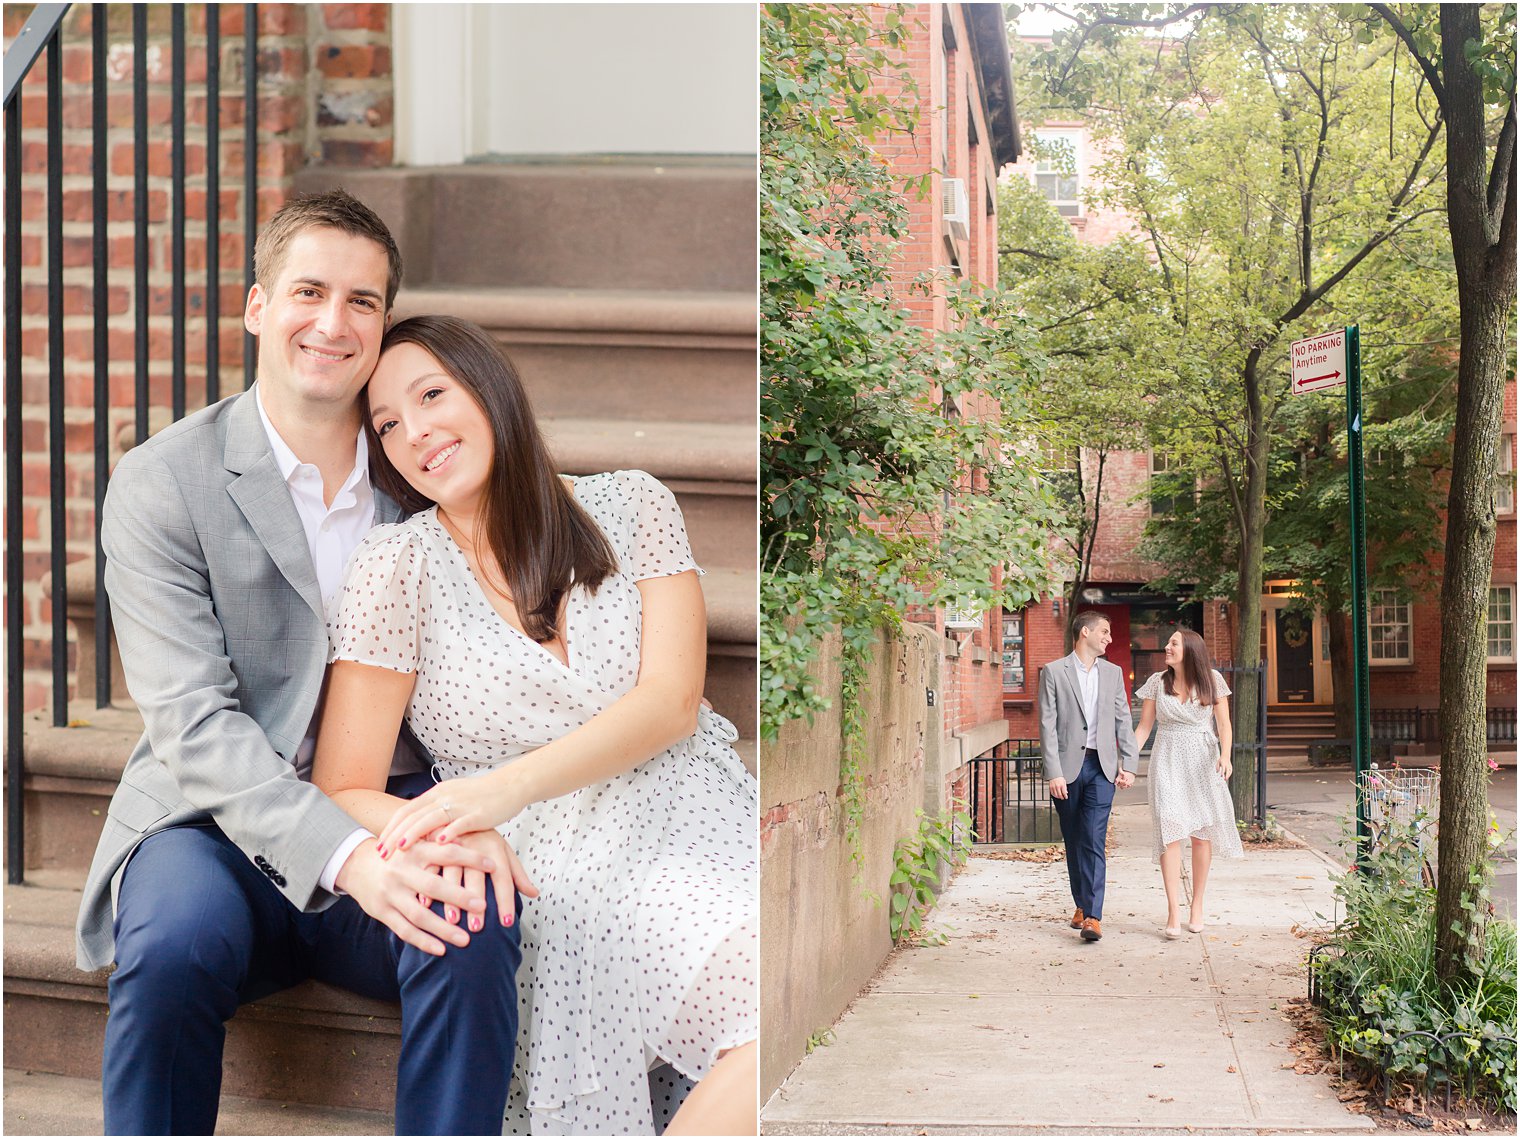 West Village Engagement Photos with couple in white dress and grey suit jacket